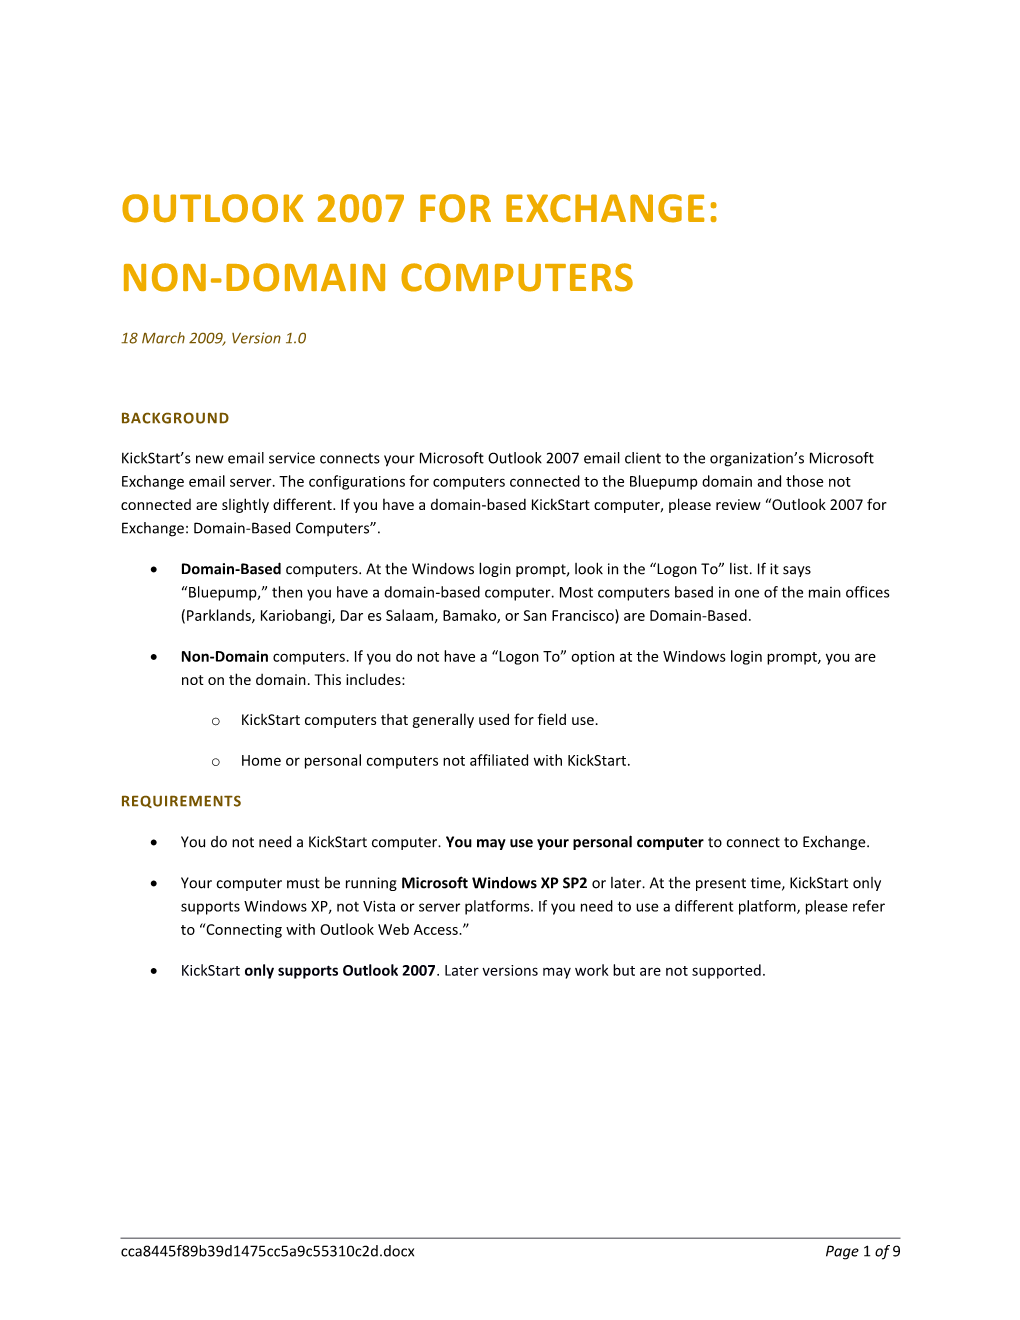 Outlook 2007 for Exchange